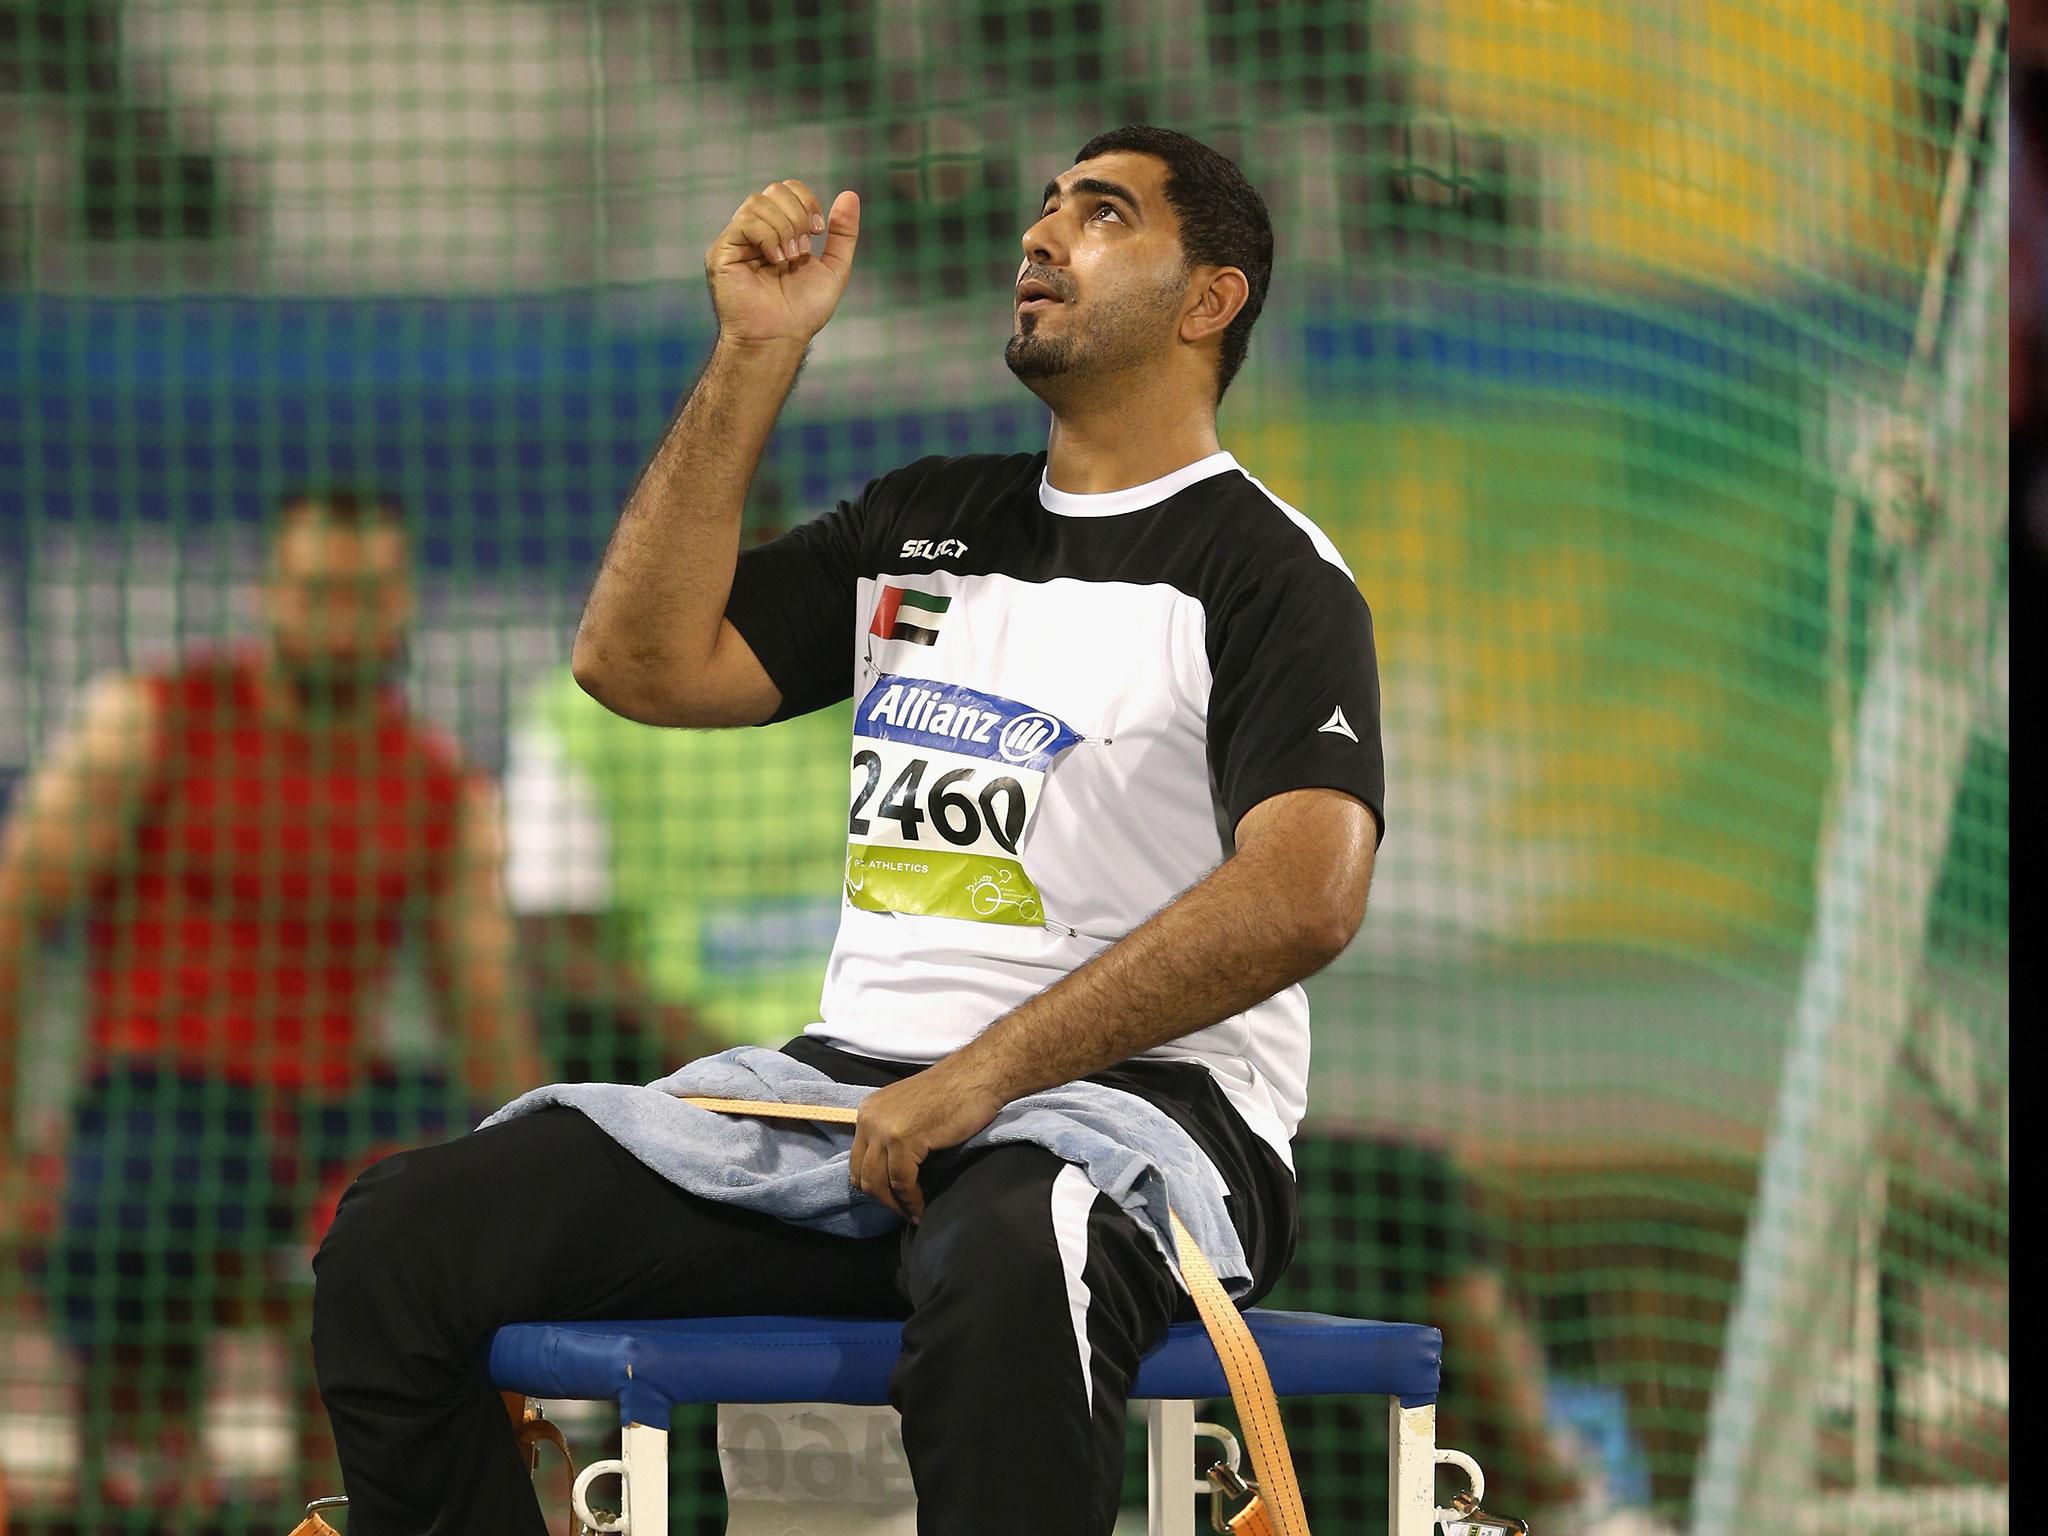 Abdullah Hayayei competes in the men's discus final of the IPC 2015 Athletics World Championships in Doha, Qatar